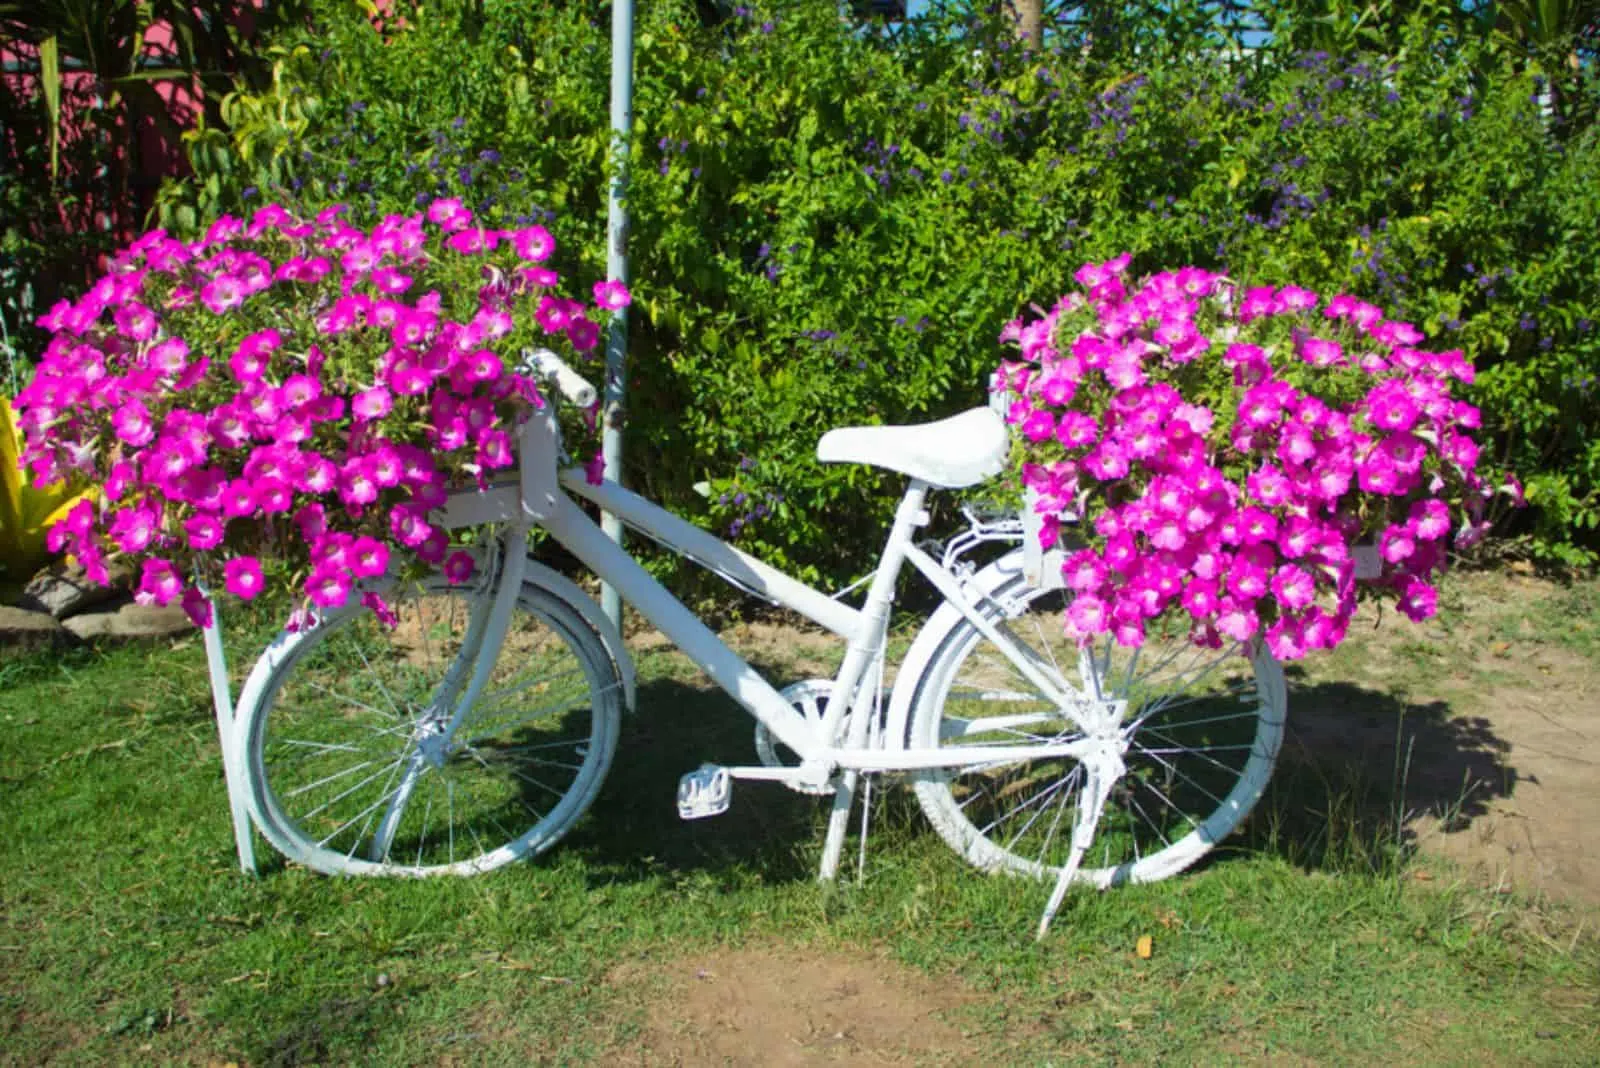 Petunias in pots on a white bike